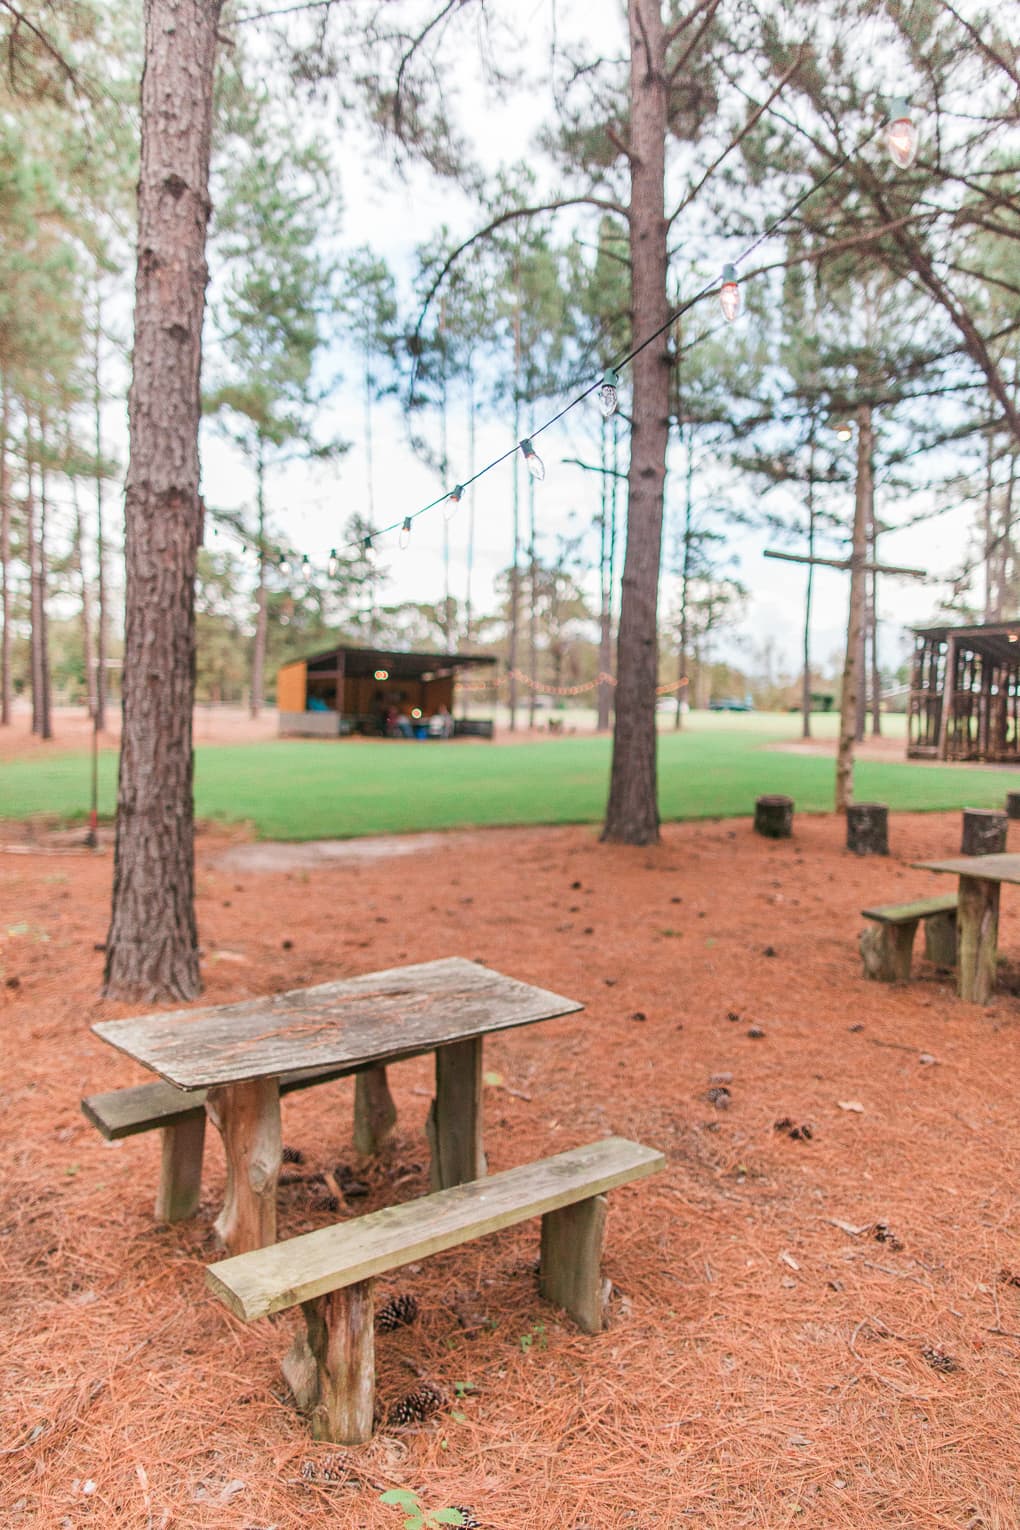 Home-made picnic tables sprinkled throughout the pine forest for use of anyone staying on the property. That building in the background is the community kitchen/hangout area.